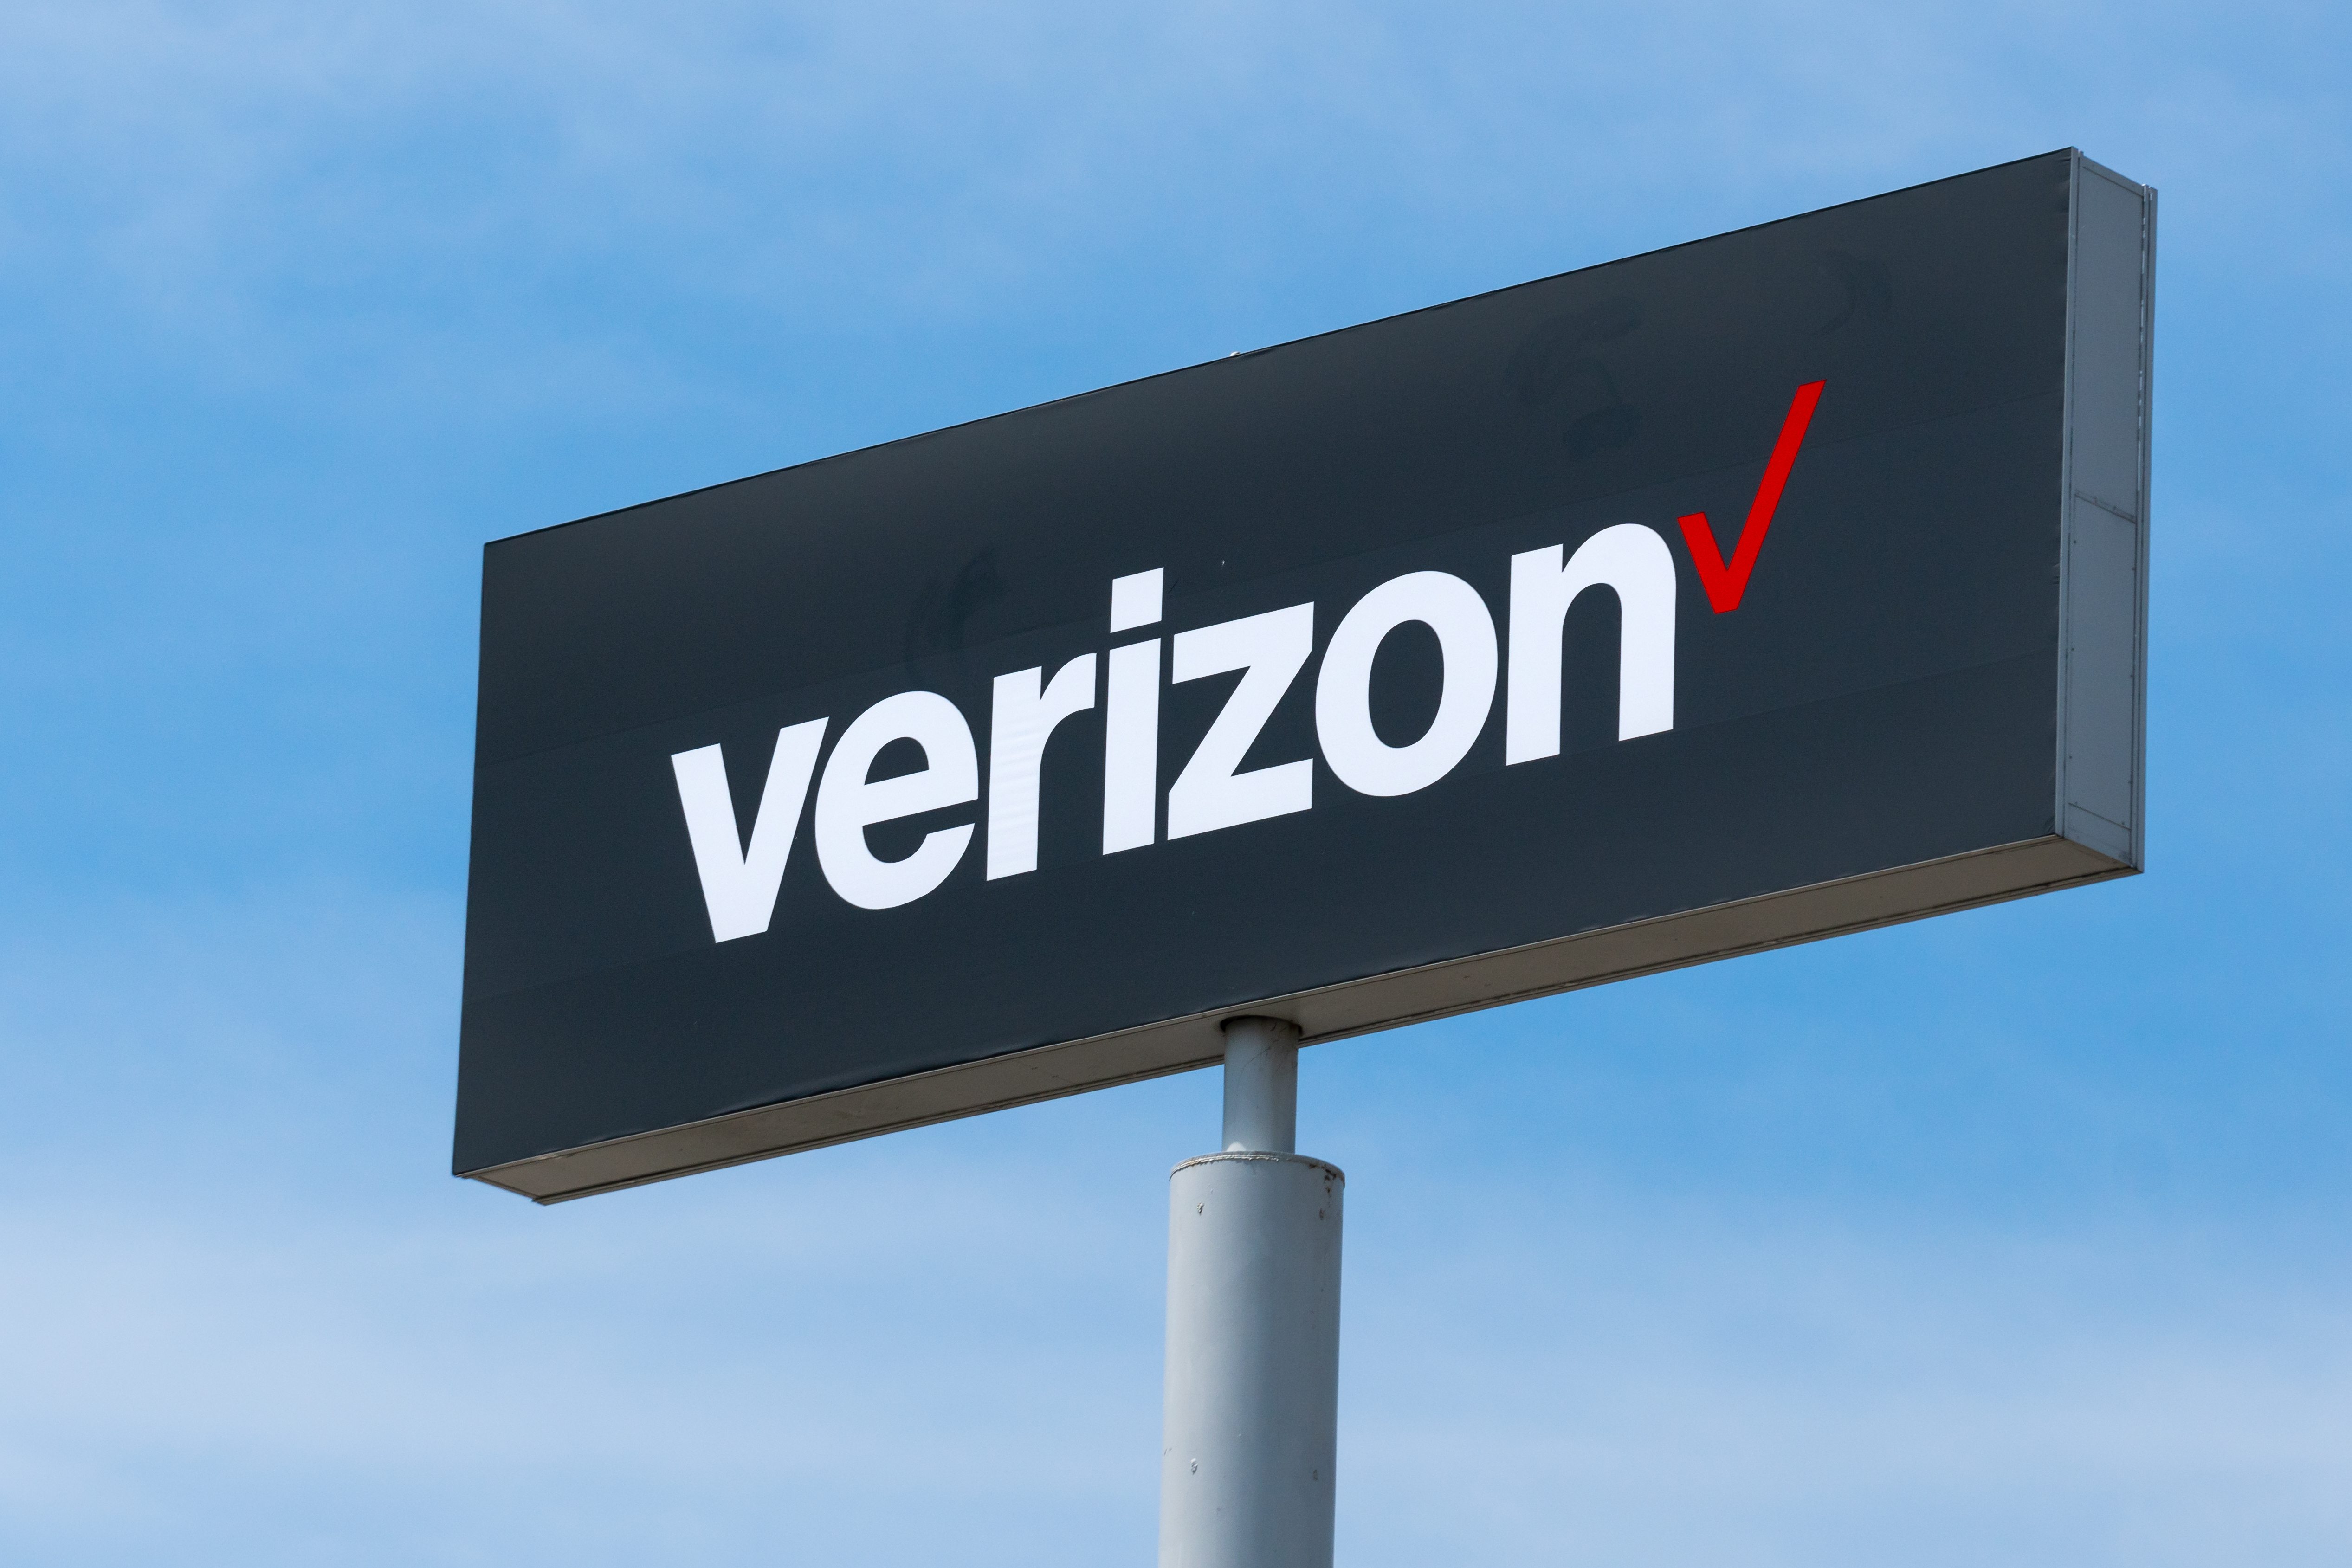 Verizon Announces New +play Partnership for Customers to Manage Streaming Subscriptions and More